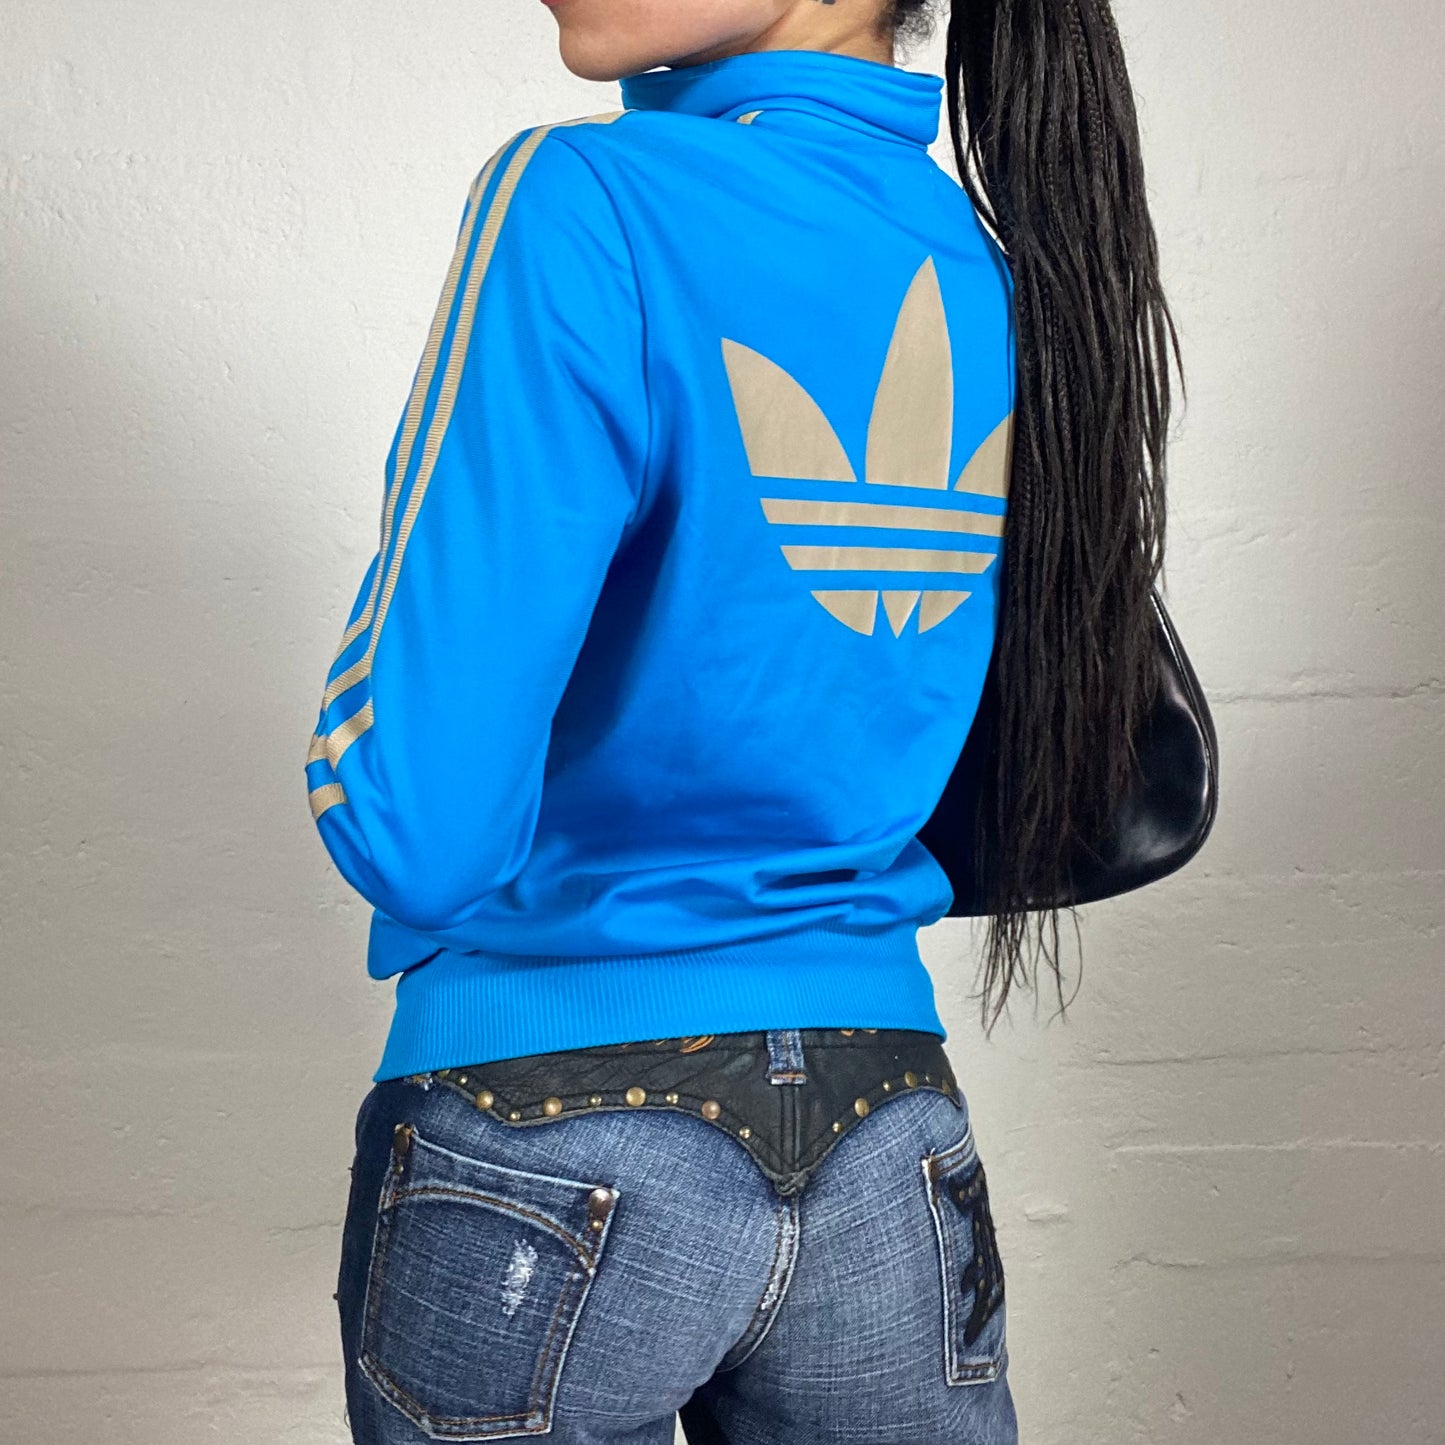 Vintage 2000's Archive Adidas Aquamarin Blue Zip Up Pullover with Contrast Back Logo (M)